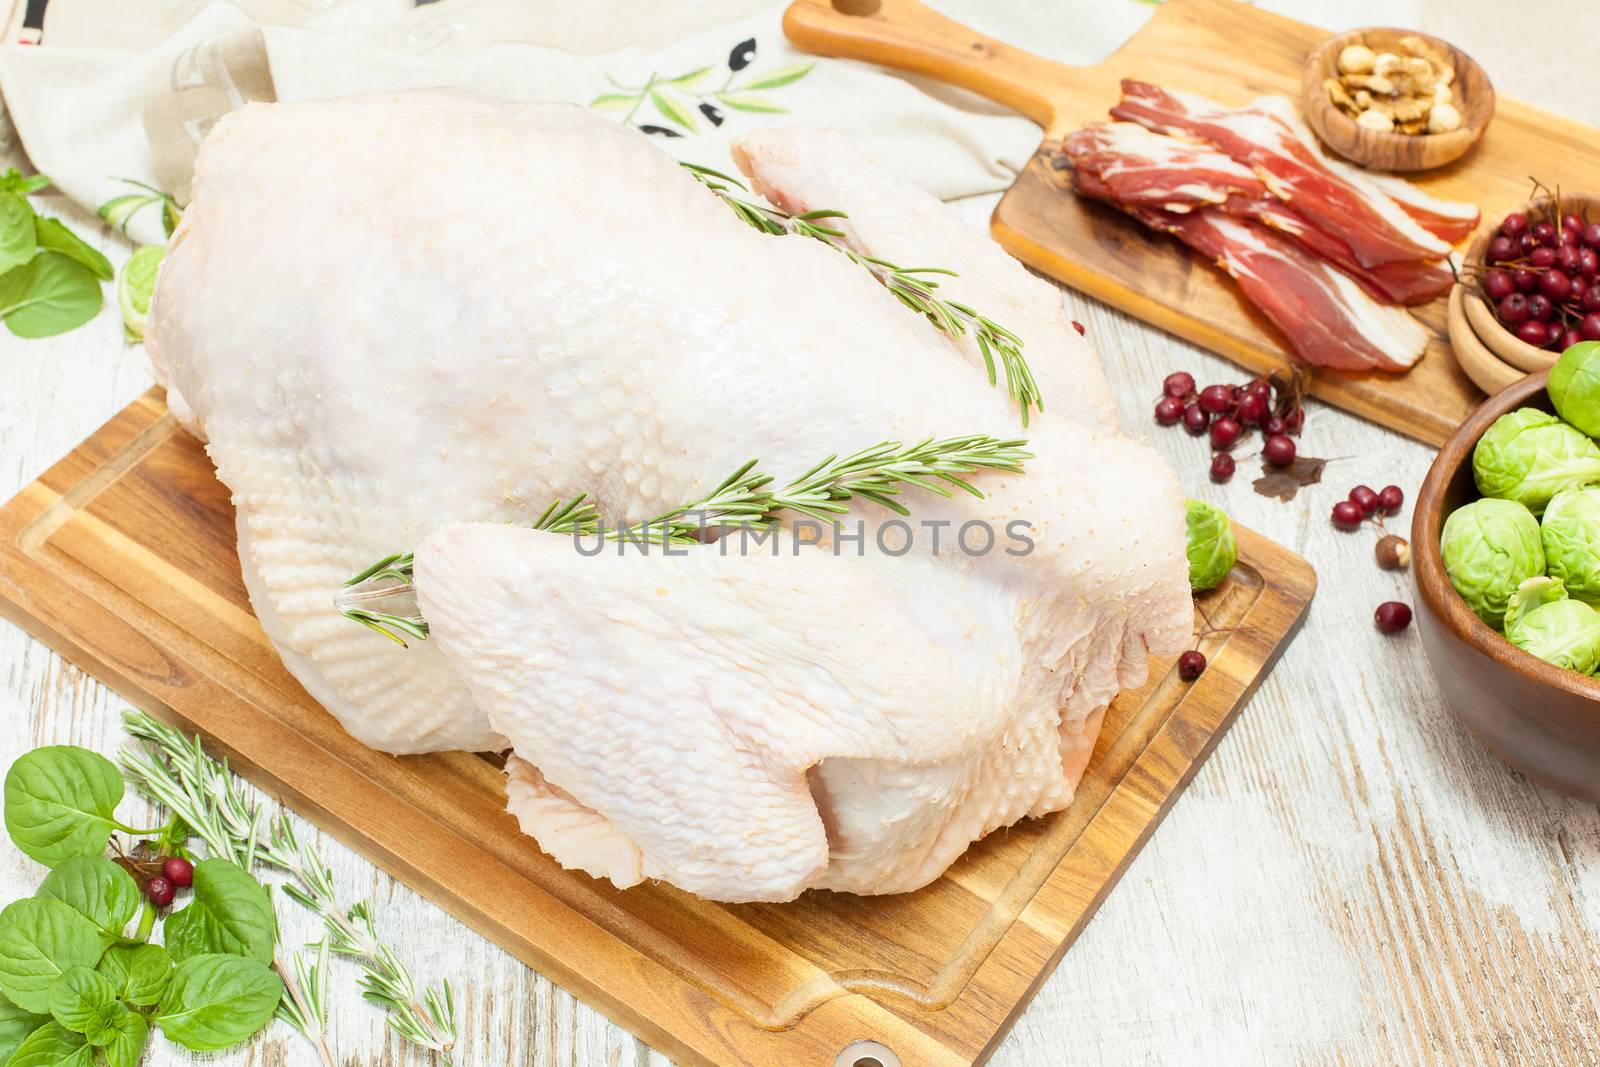 Whole raw turkey on wooden cutting board with vegetables, ham and spices.Preparing Thanksgiving Dinner with Turkey and ingredients such as bacon, vegetables, nuts, cranberries, pomegranate, spices